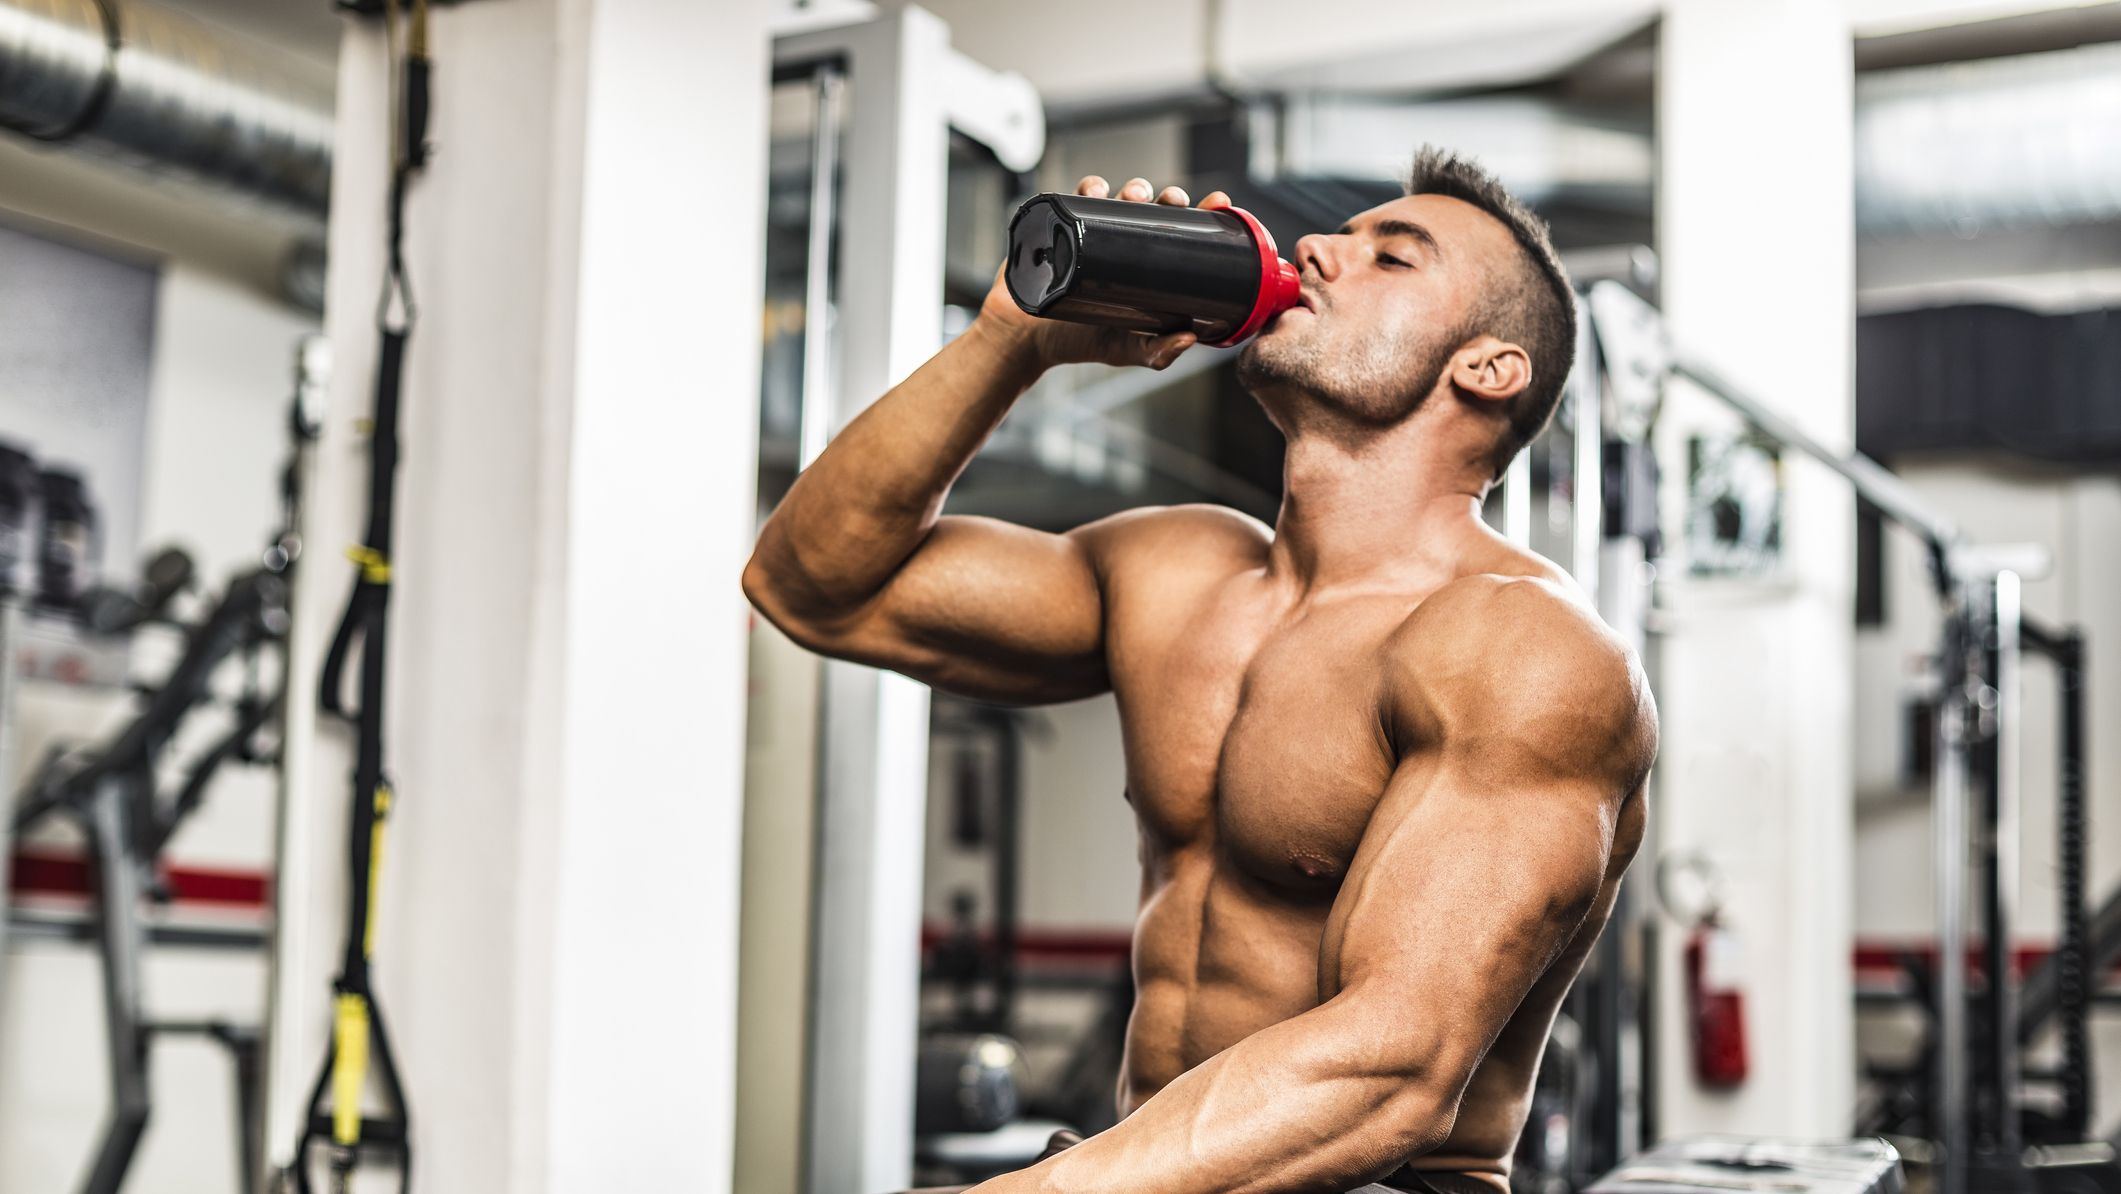 Best Sources of Protein to Build Muscle